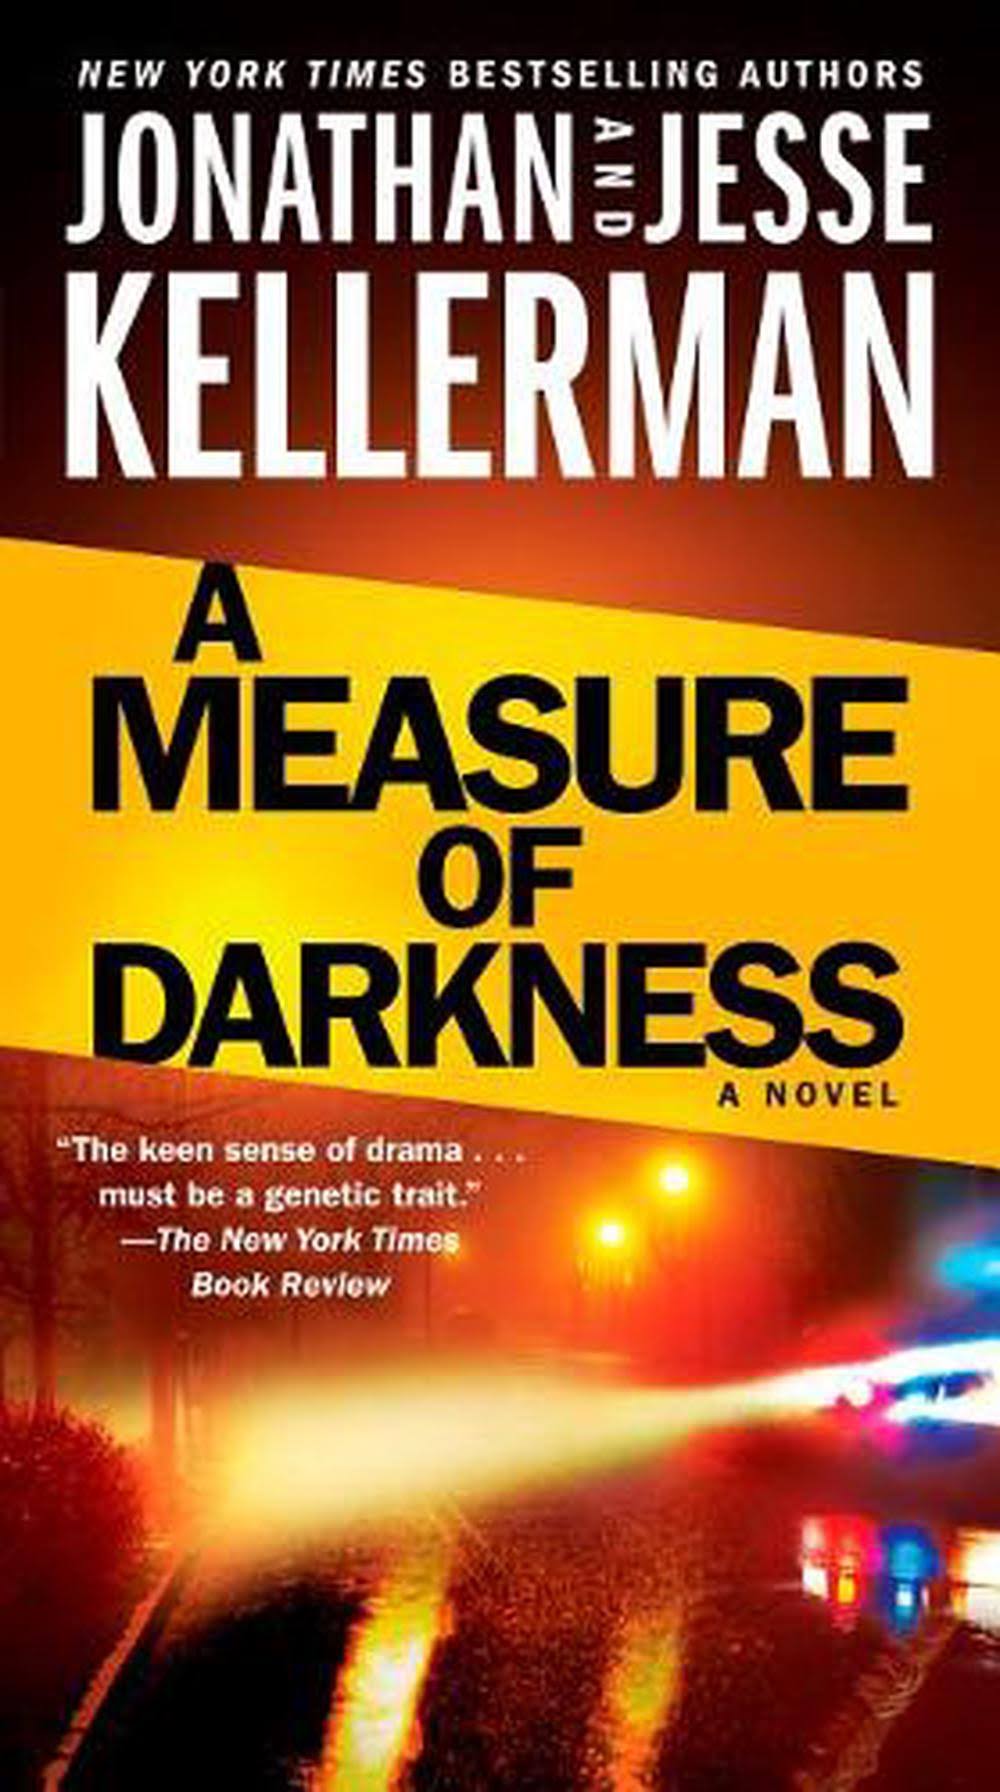 A Measure of Darkness: A Novel [Book]